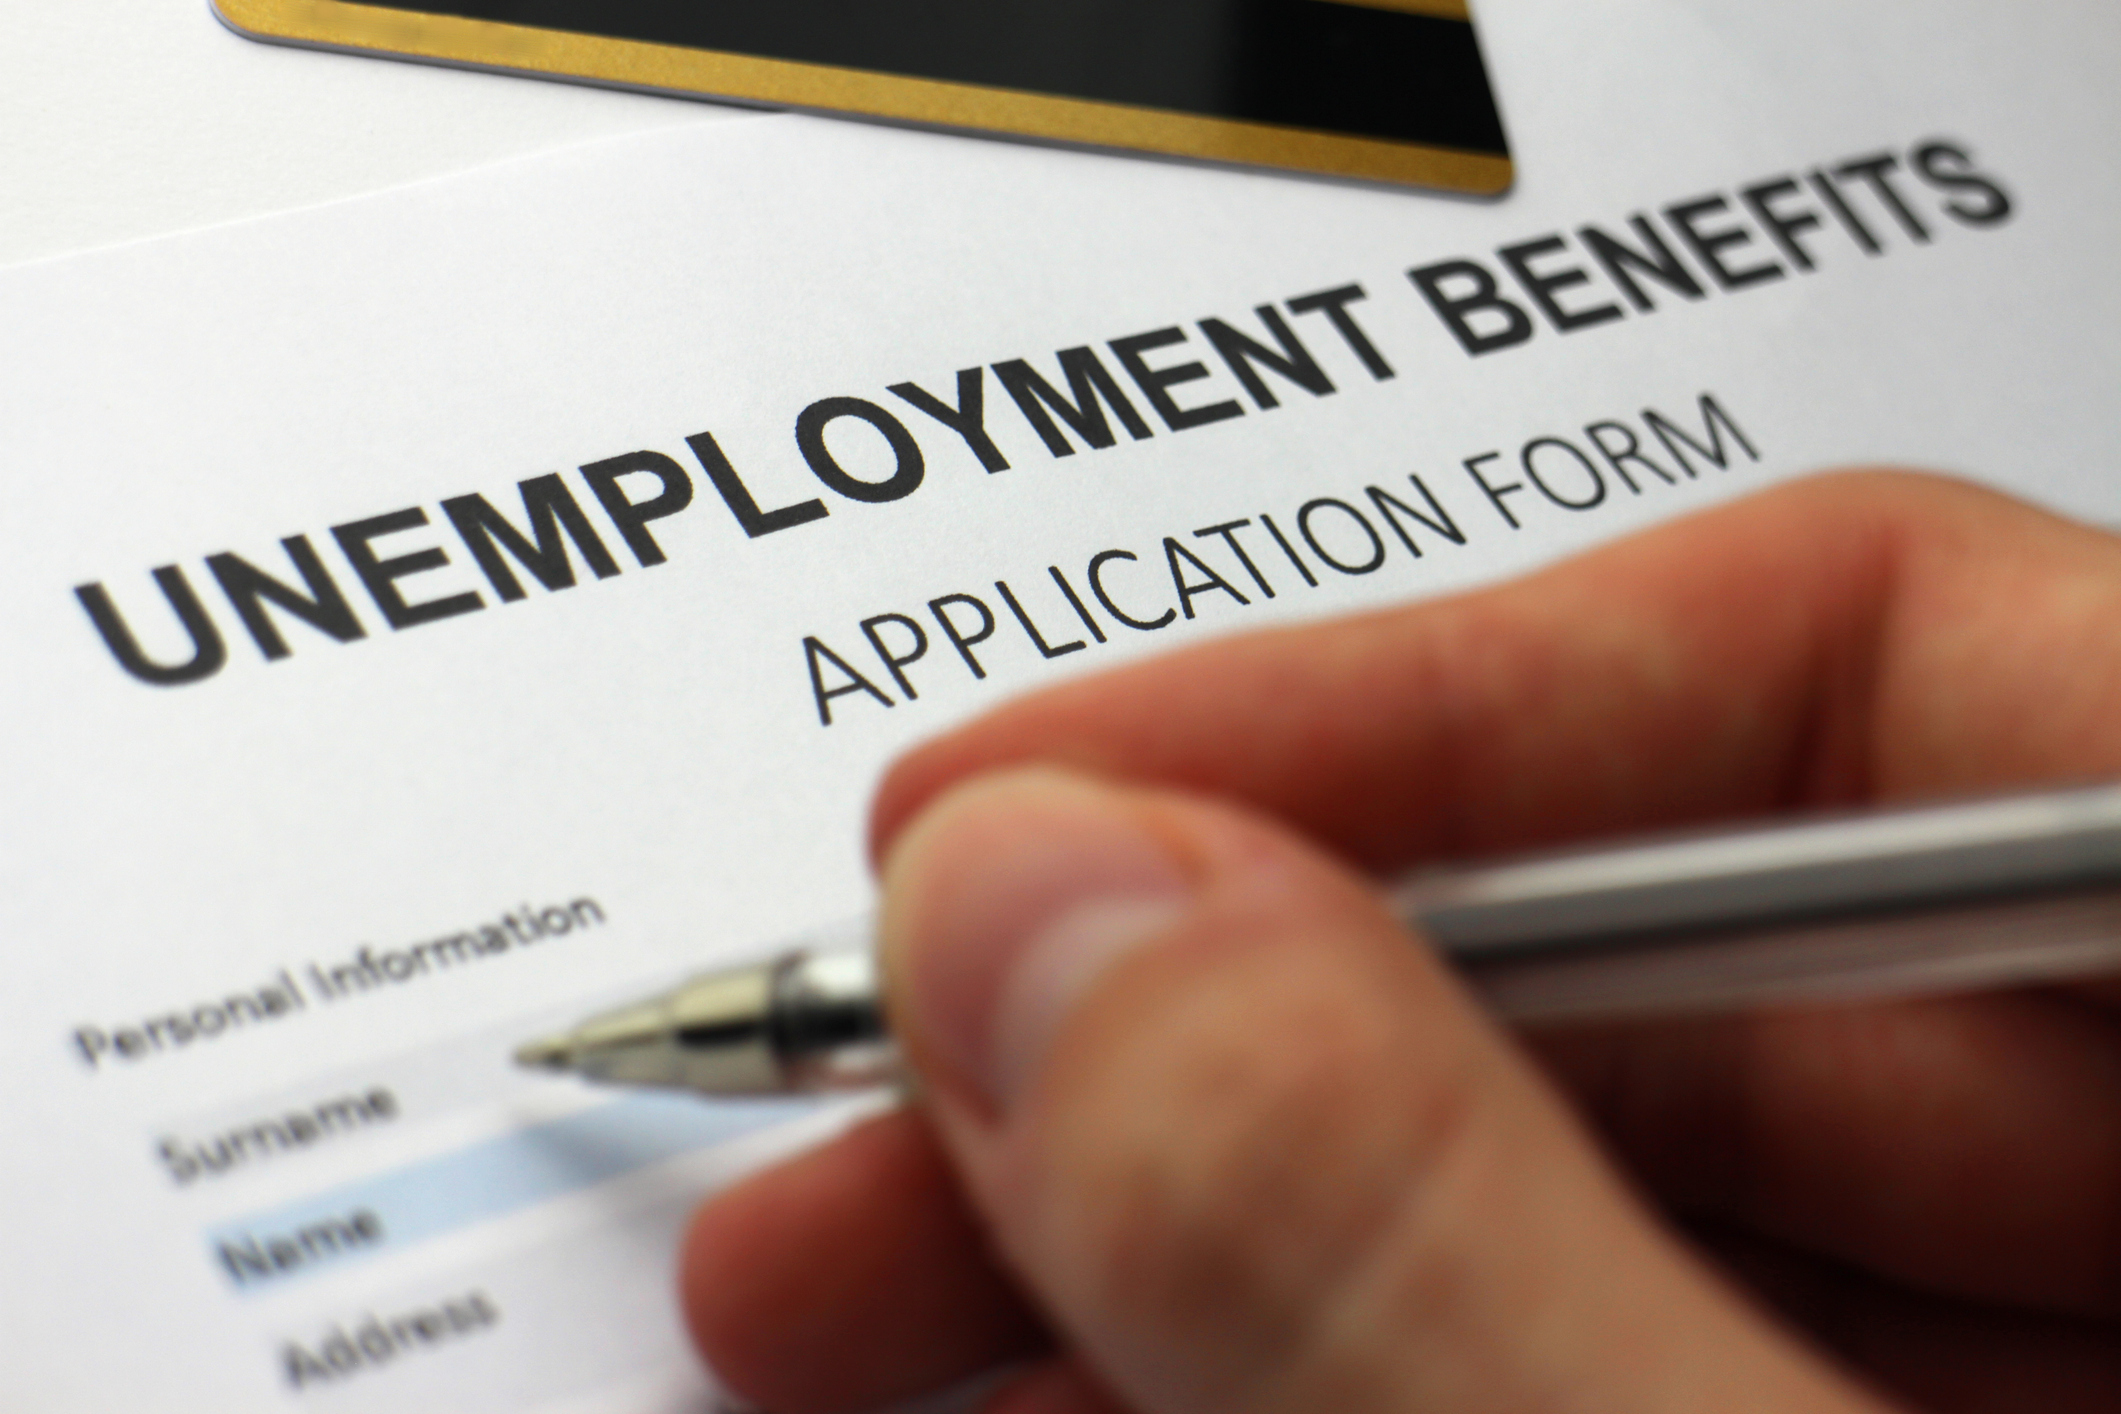 Drug Testing for Unemployment Applicants May Be Coming Soon Thumbnail